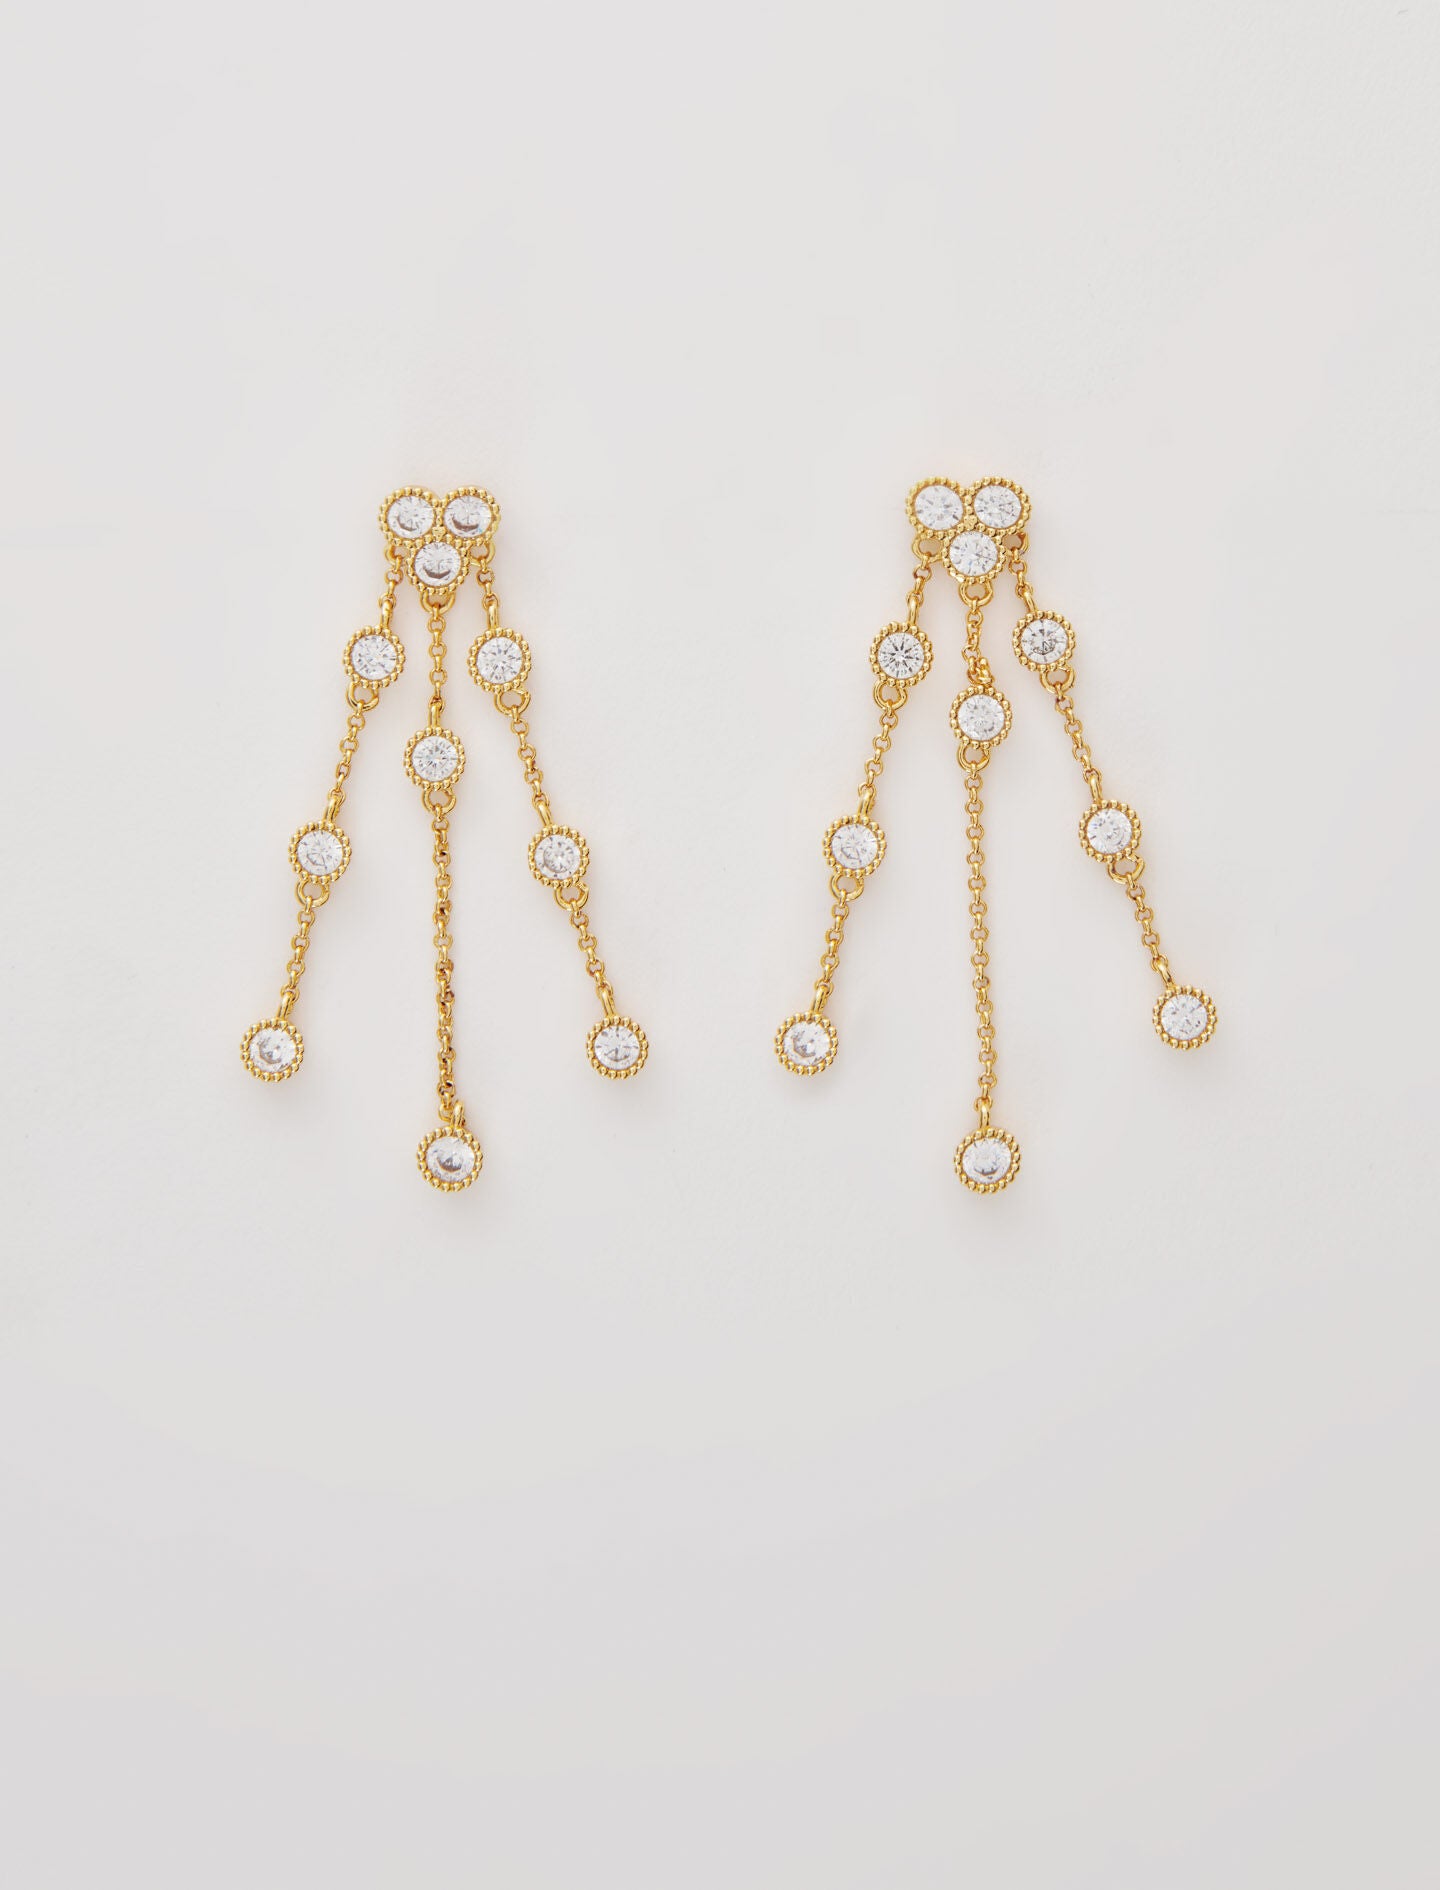 GOLD-PLATED RECYCLED BRASS EARRINGS